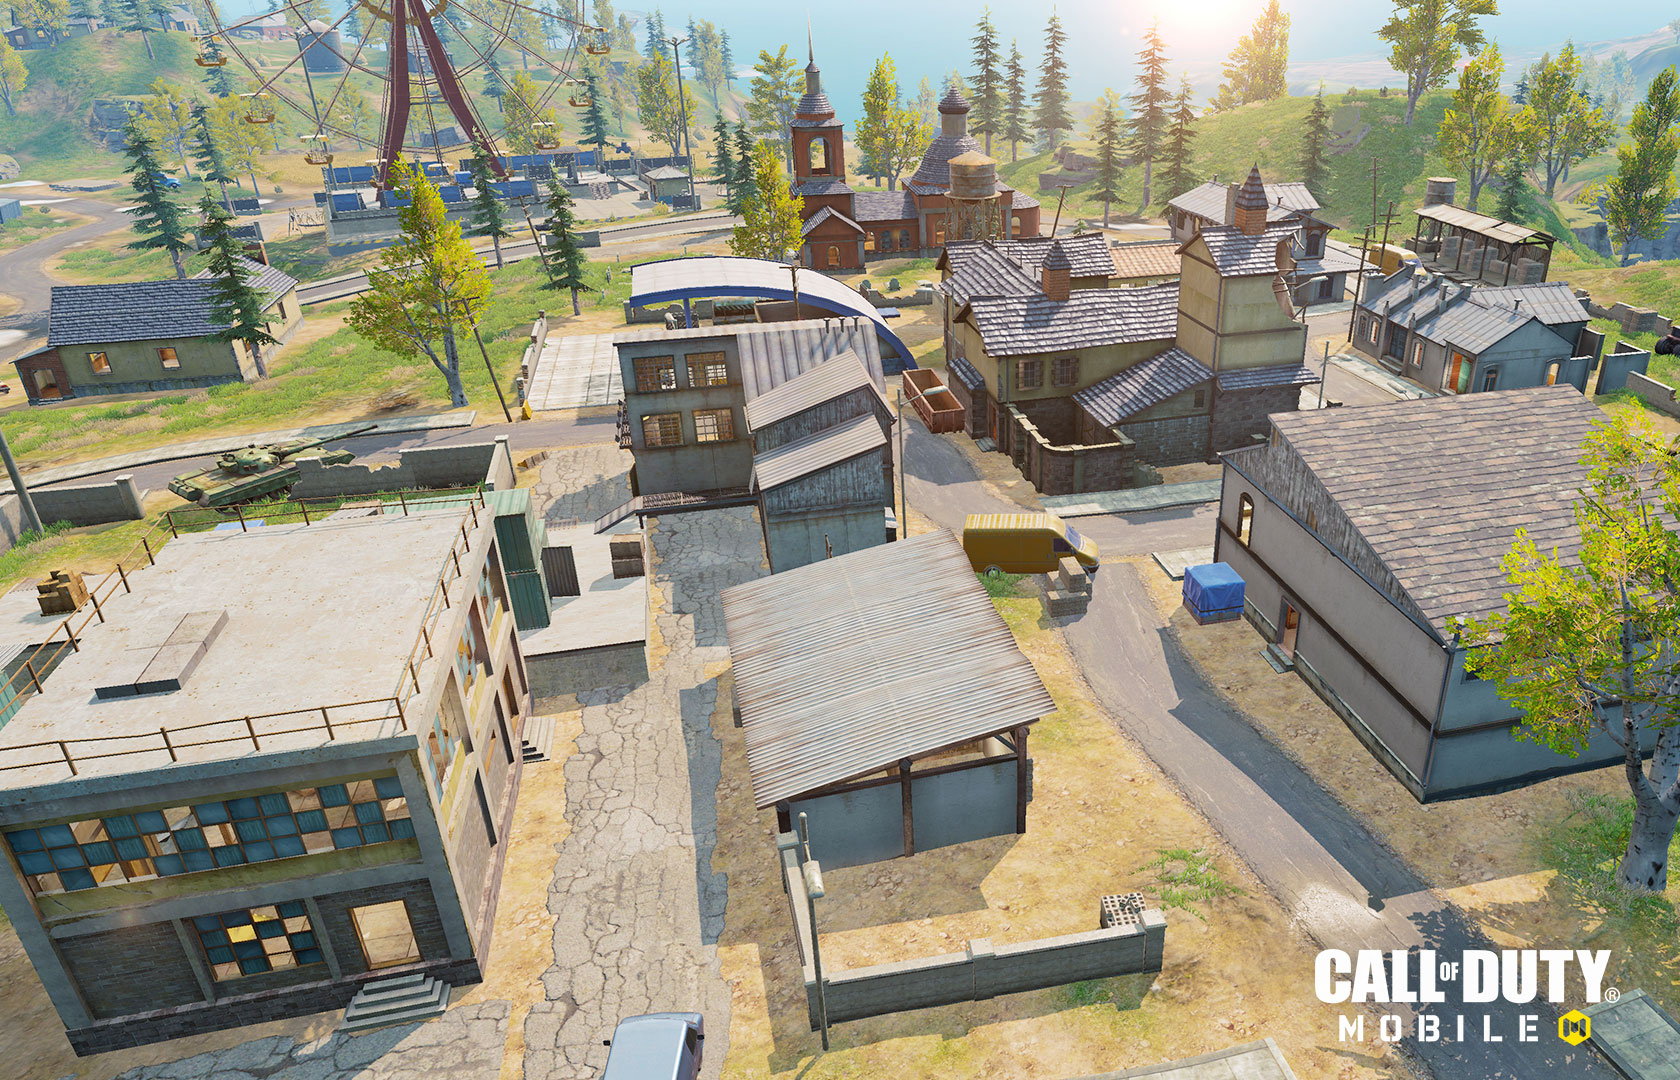 A Grand Tour Of The Call Of Duty Mobile Battle Royale Map Part 2